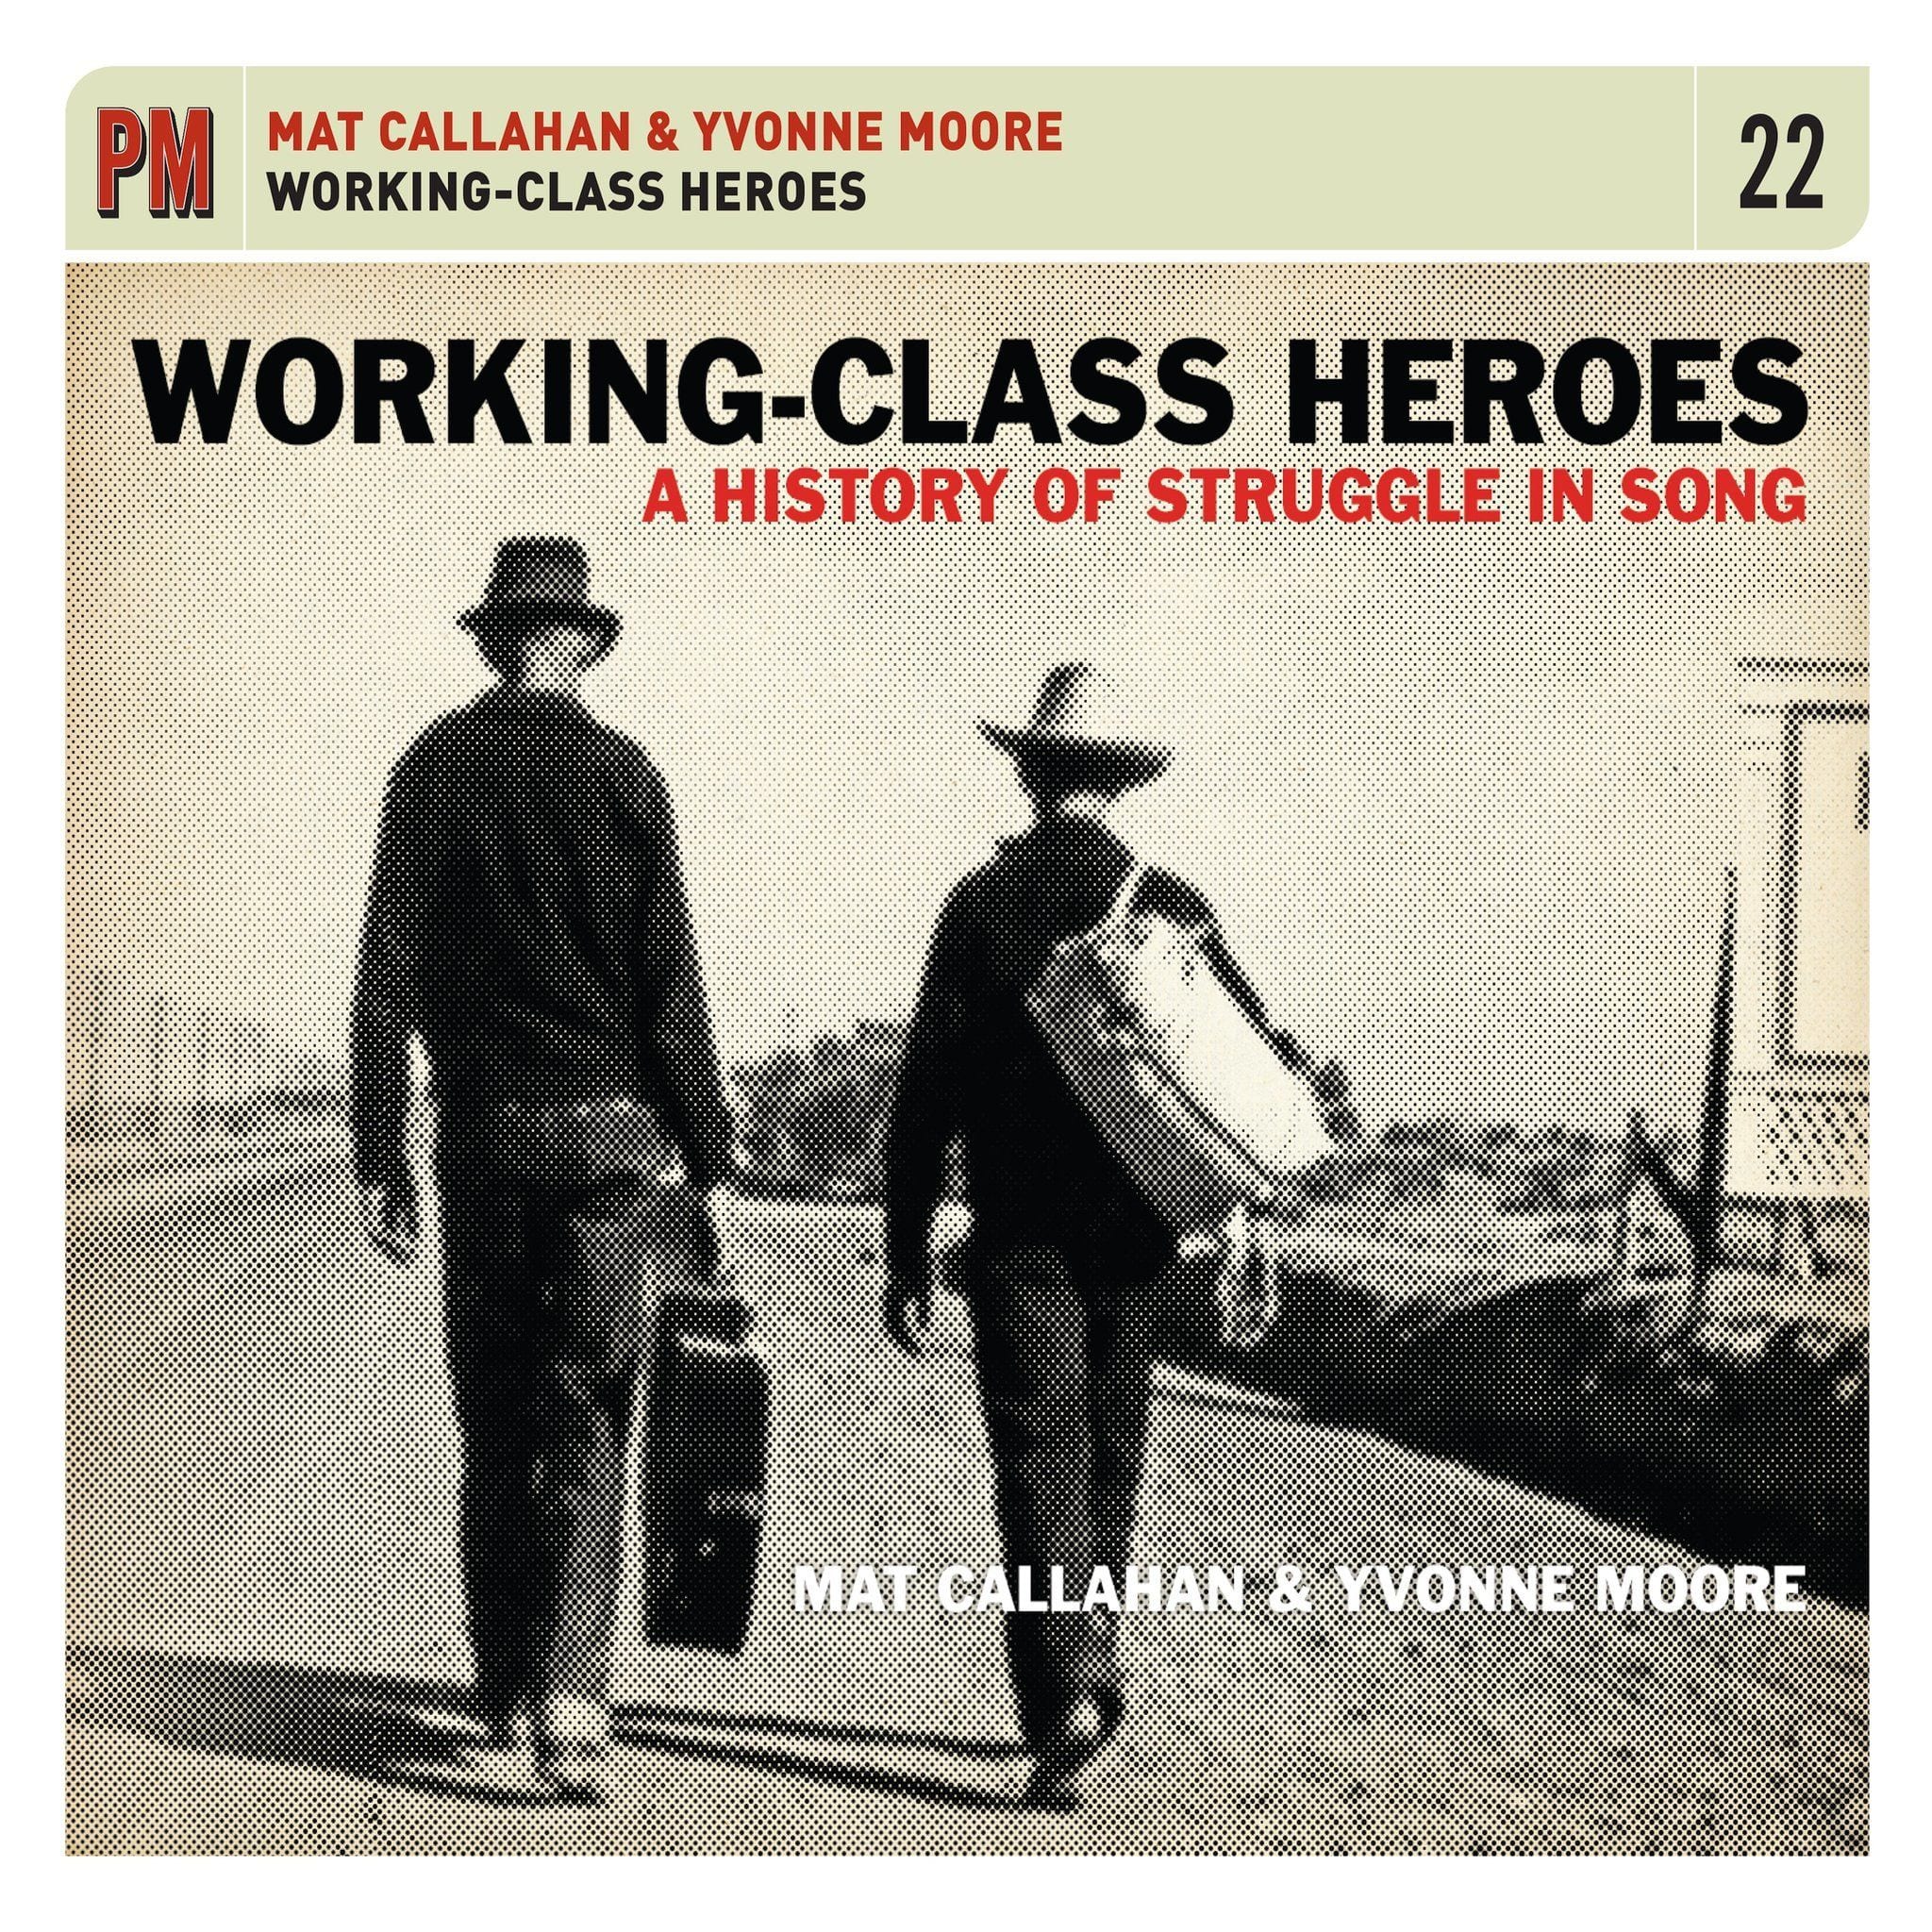 Folk Singers Mat Callahan and Yvonne Moore Show That a Working Class Hero Was Something to Be